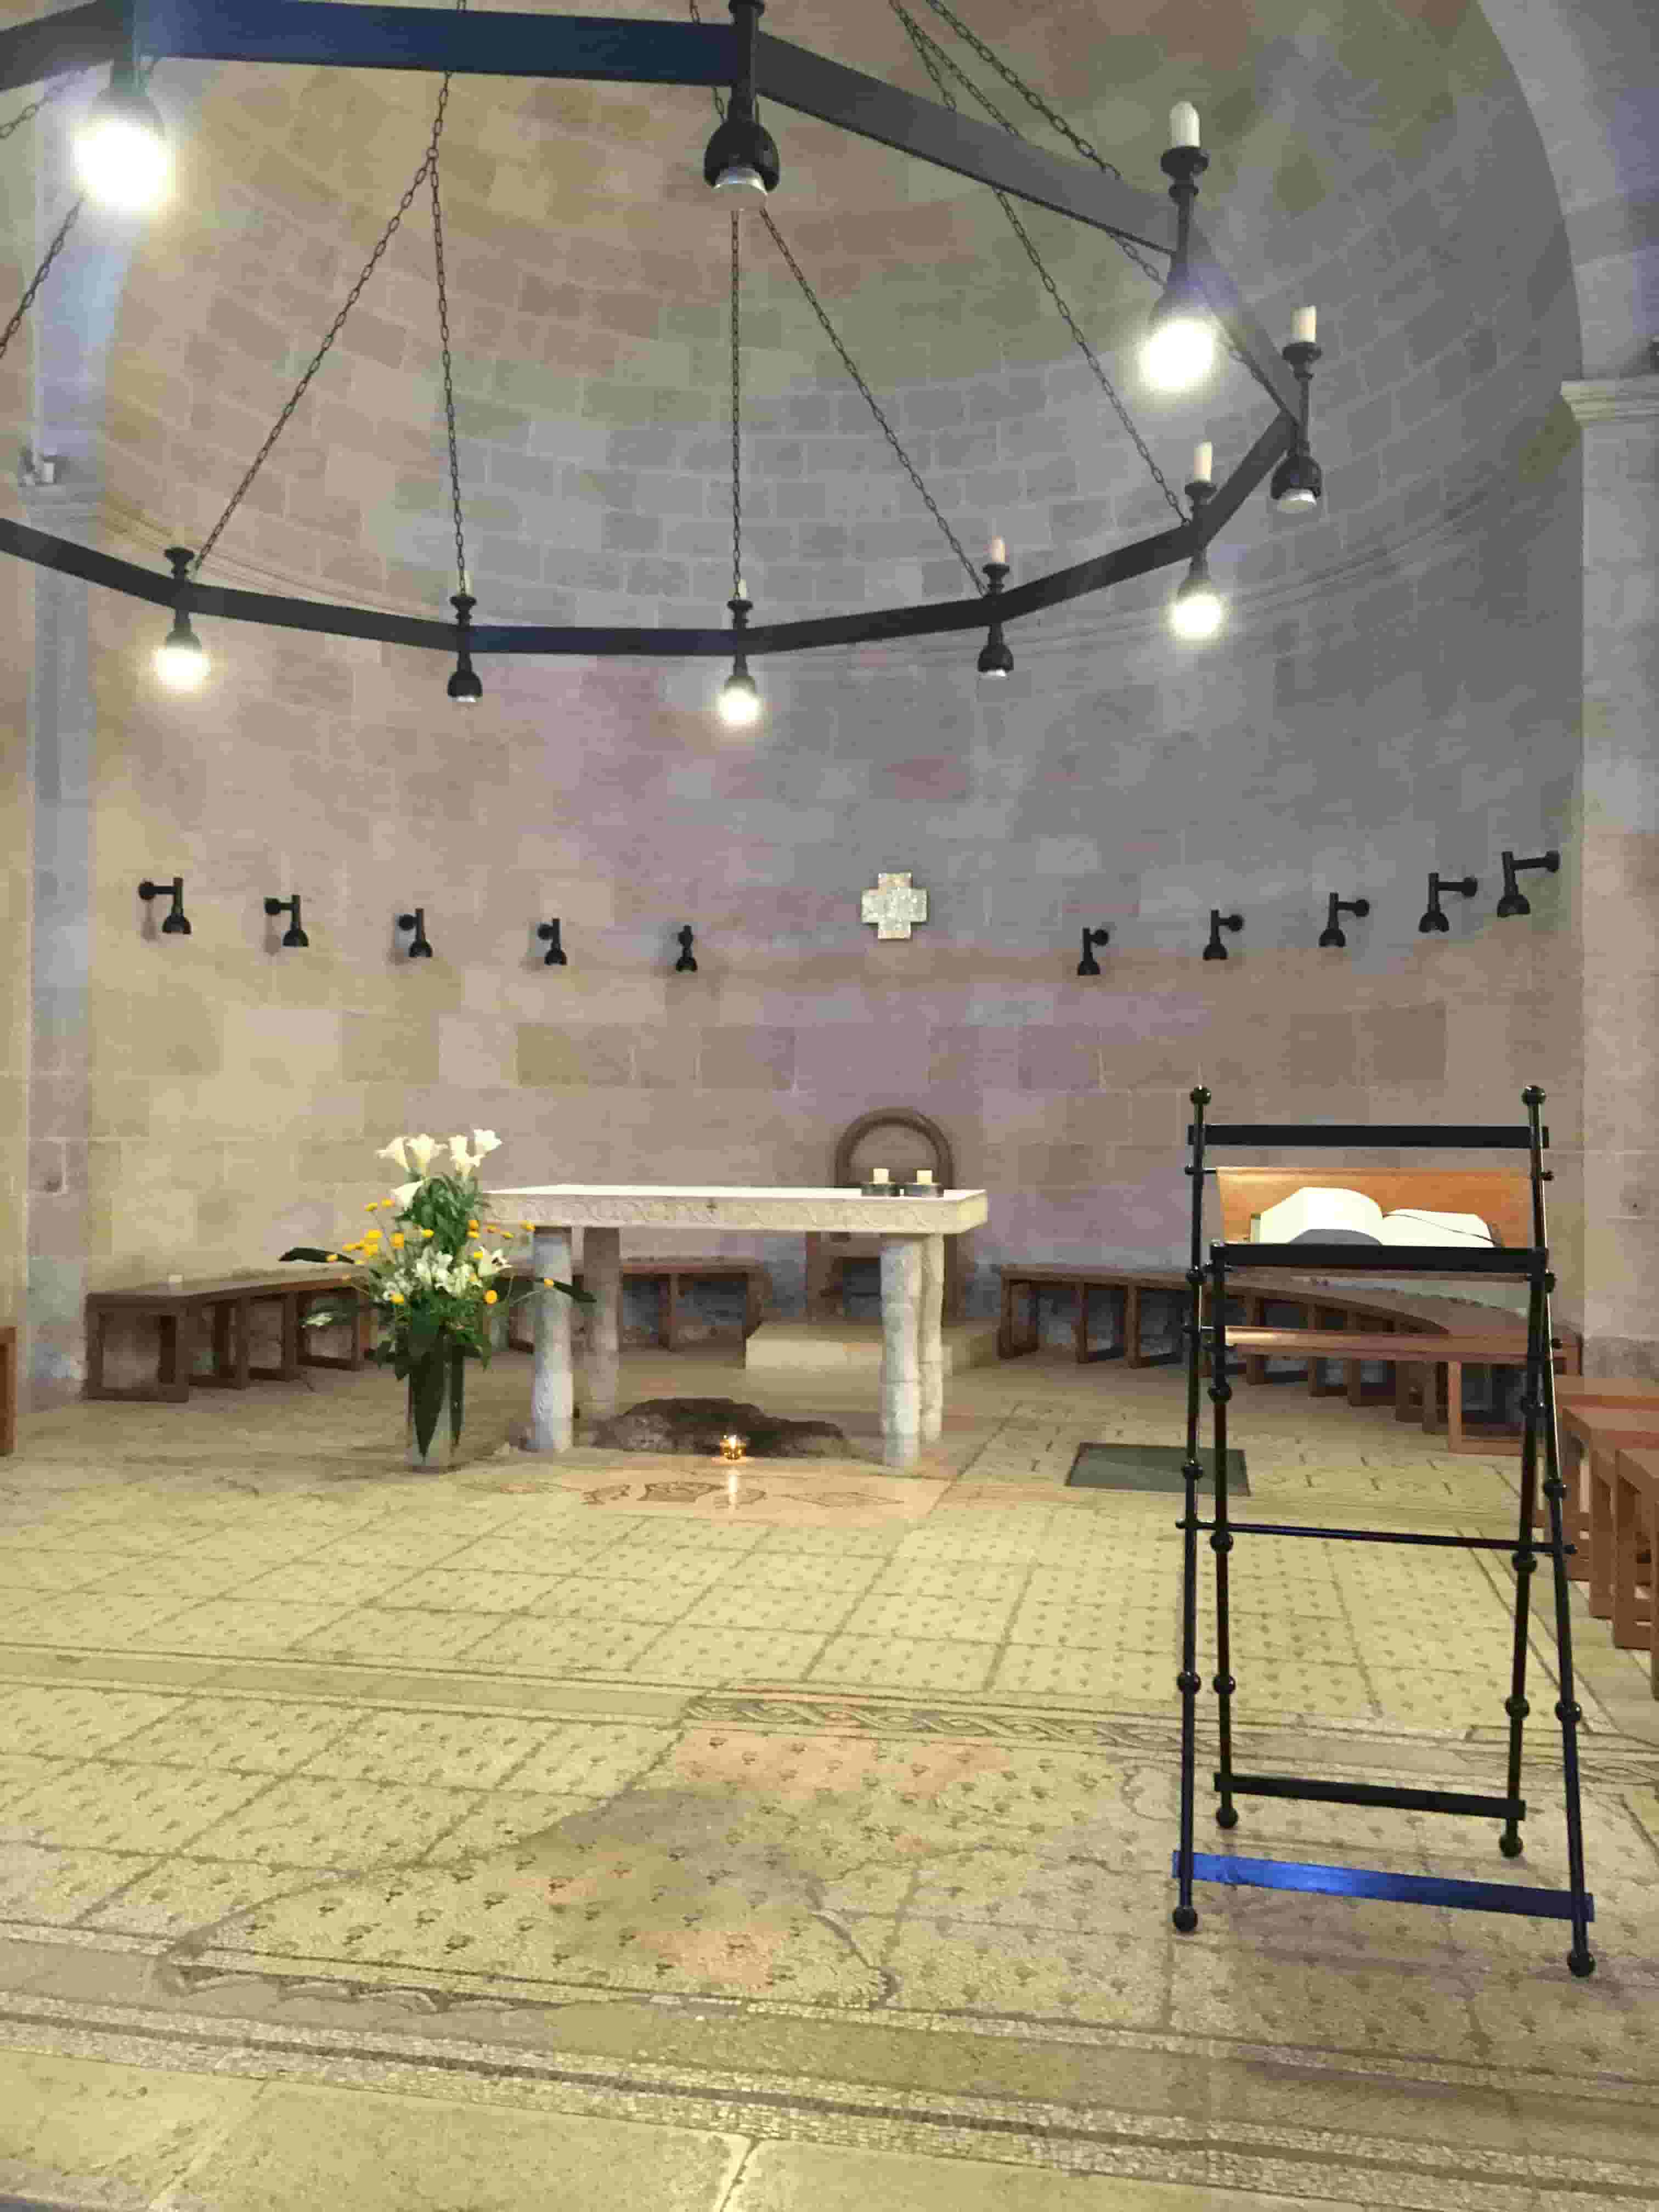 Church of the Multiplication of the Loaves and Fishes in Galilee